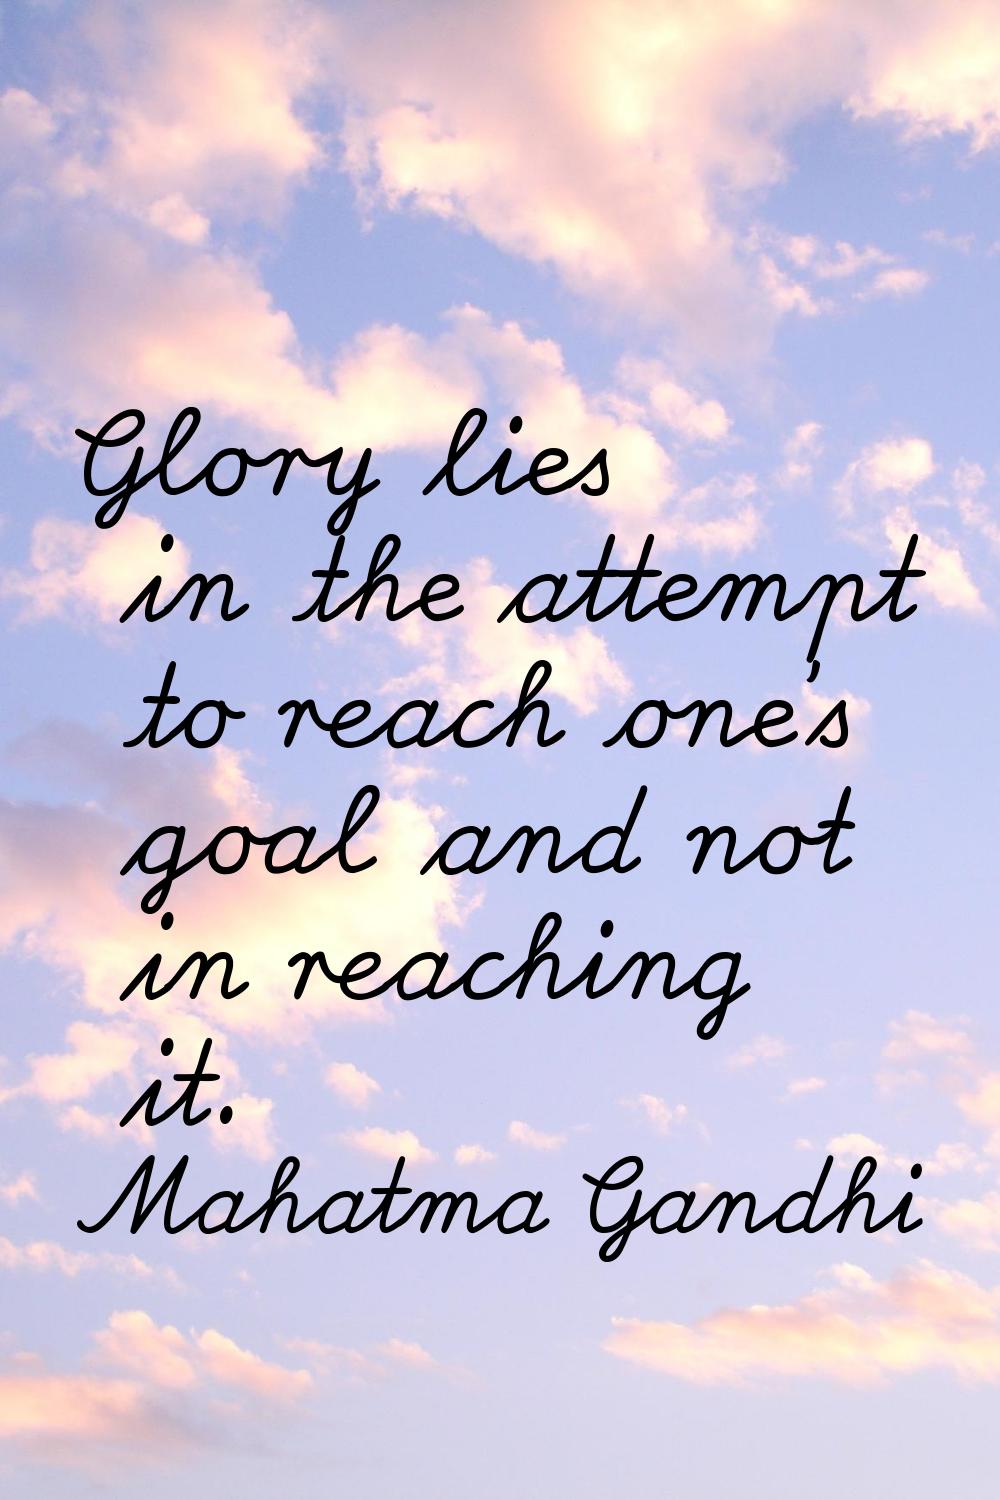 Glory lies in the attempt to reach one's goal and not in reaching it.